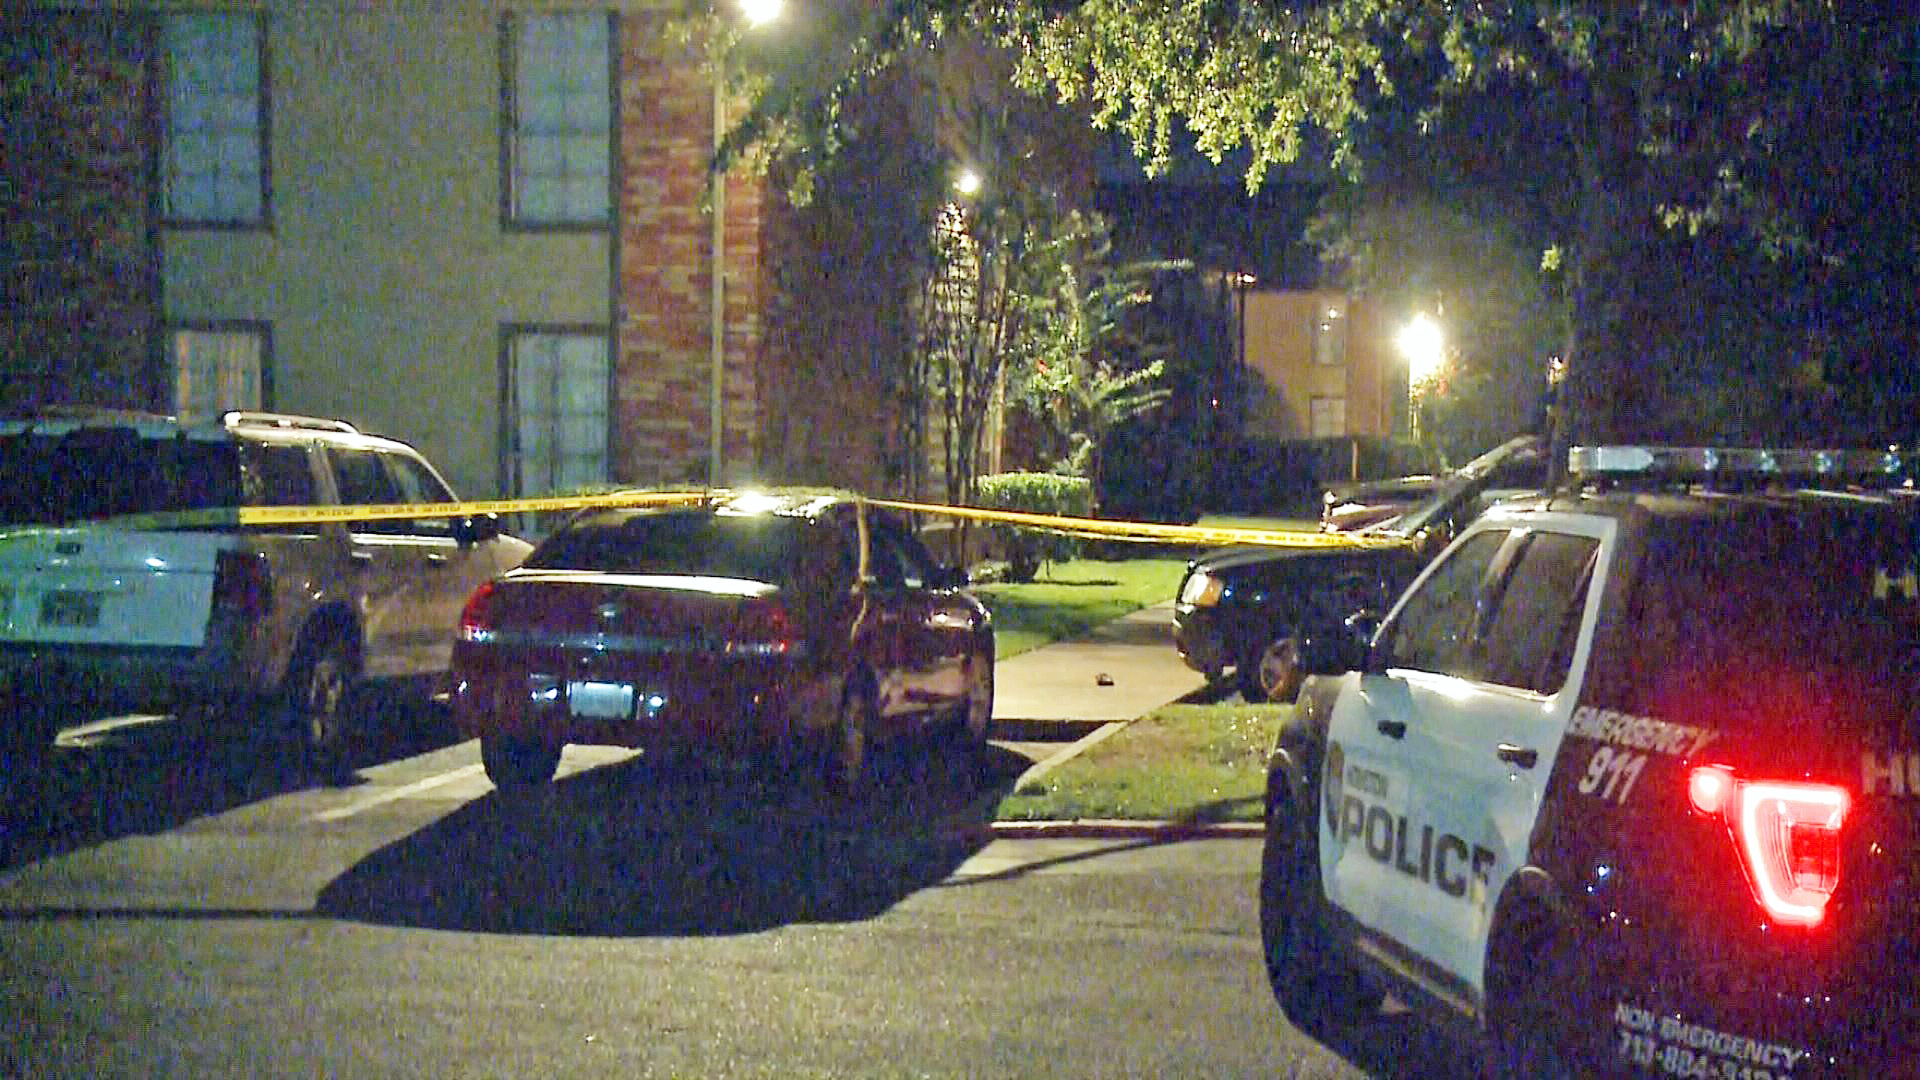 Man shot in parking lot of east Houston apartments - KHOU